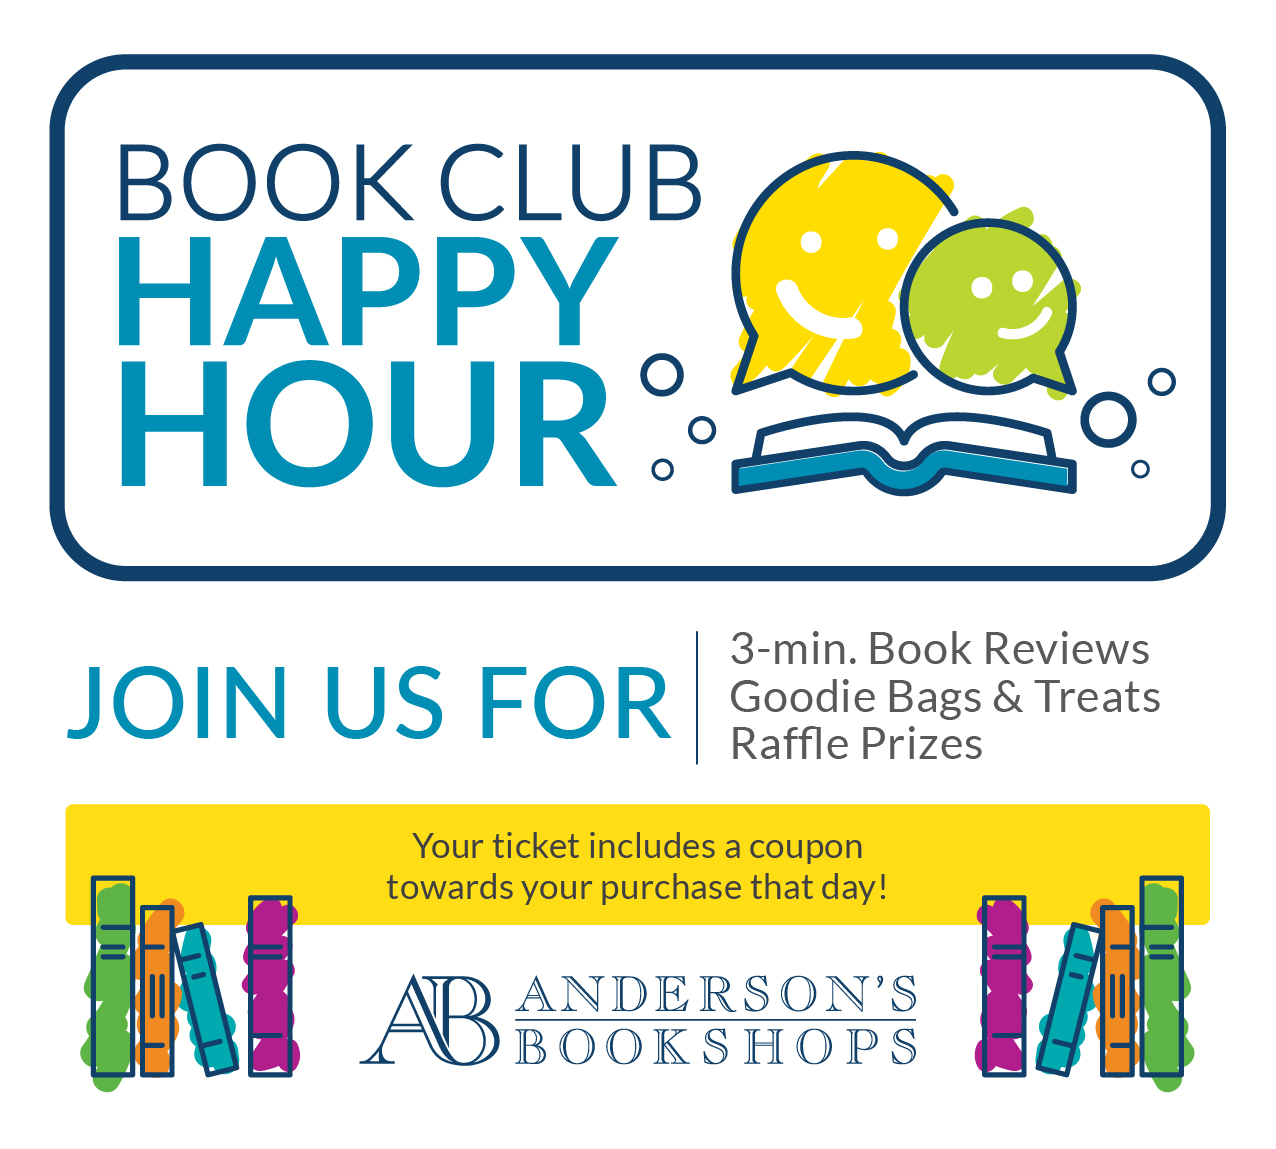 In-Person Book Club Happy Hour at Anderson's Bookshop Naperville!